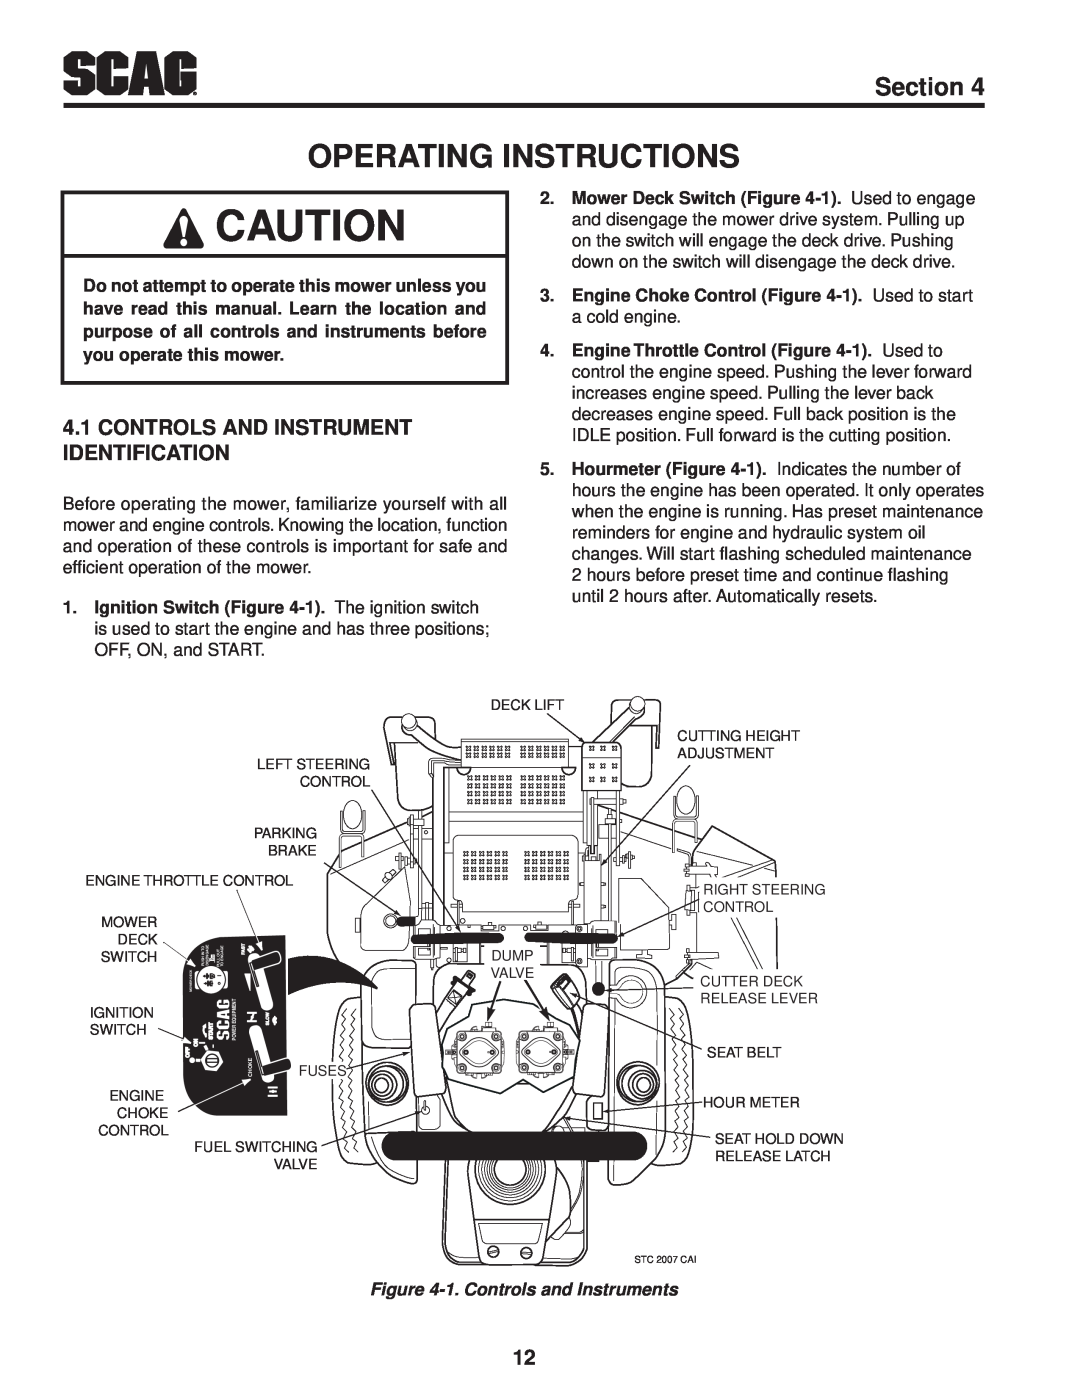 Scag Power Equipment STWC48V-26KA-LC, STWC48V-25CV Operating Instructions, Controls And Instrument Identification, Section 